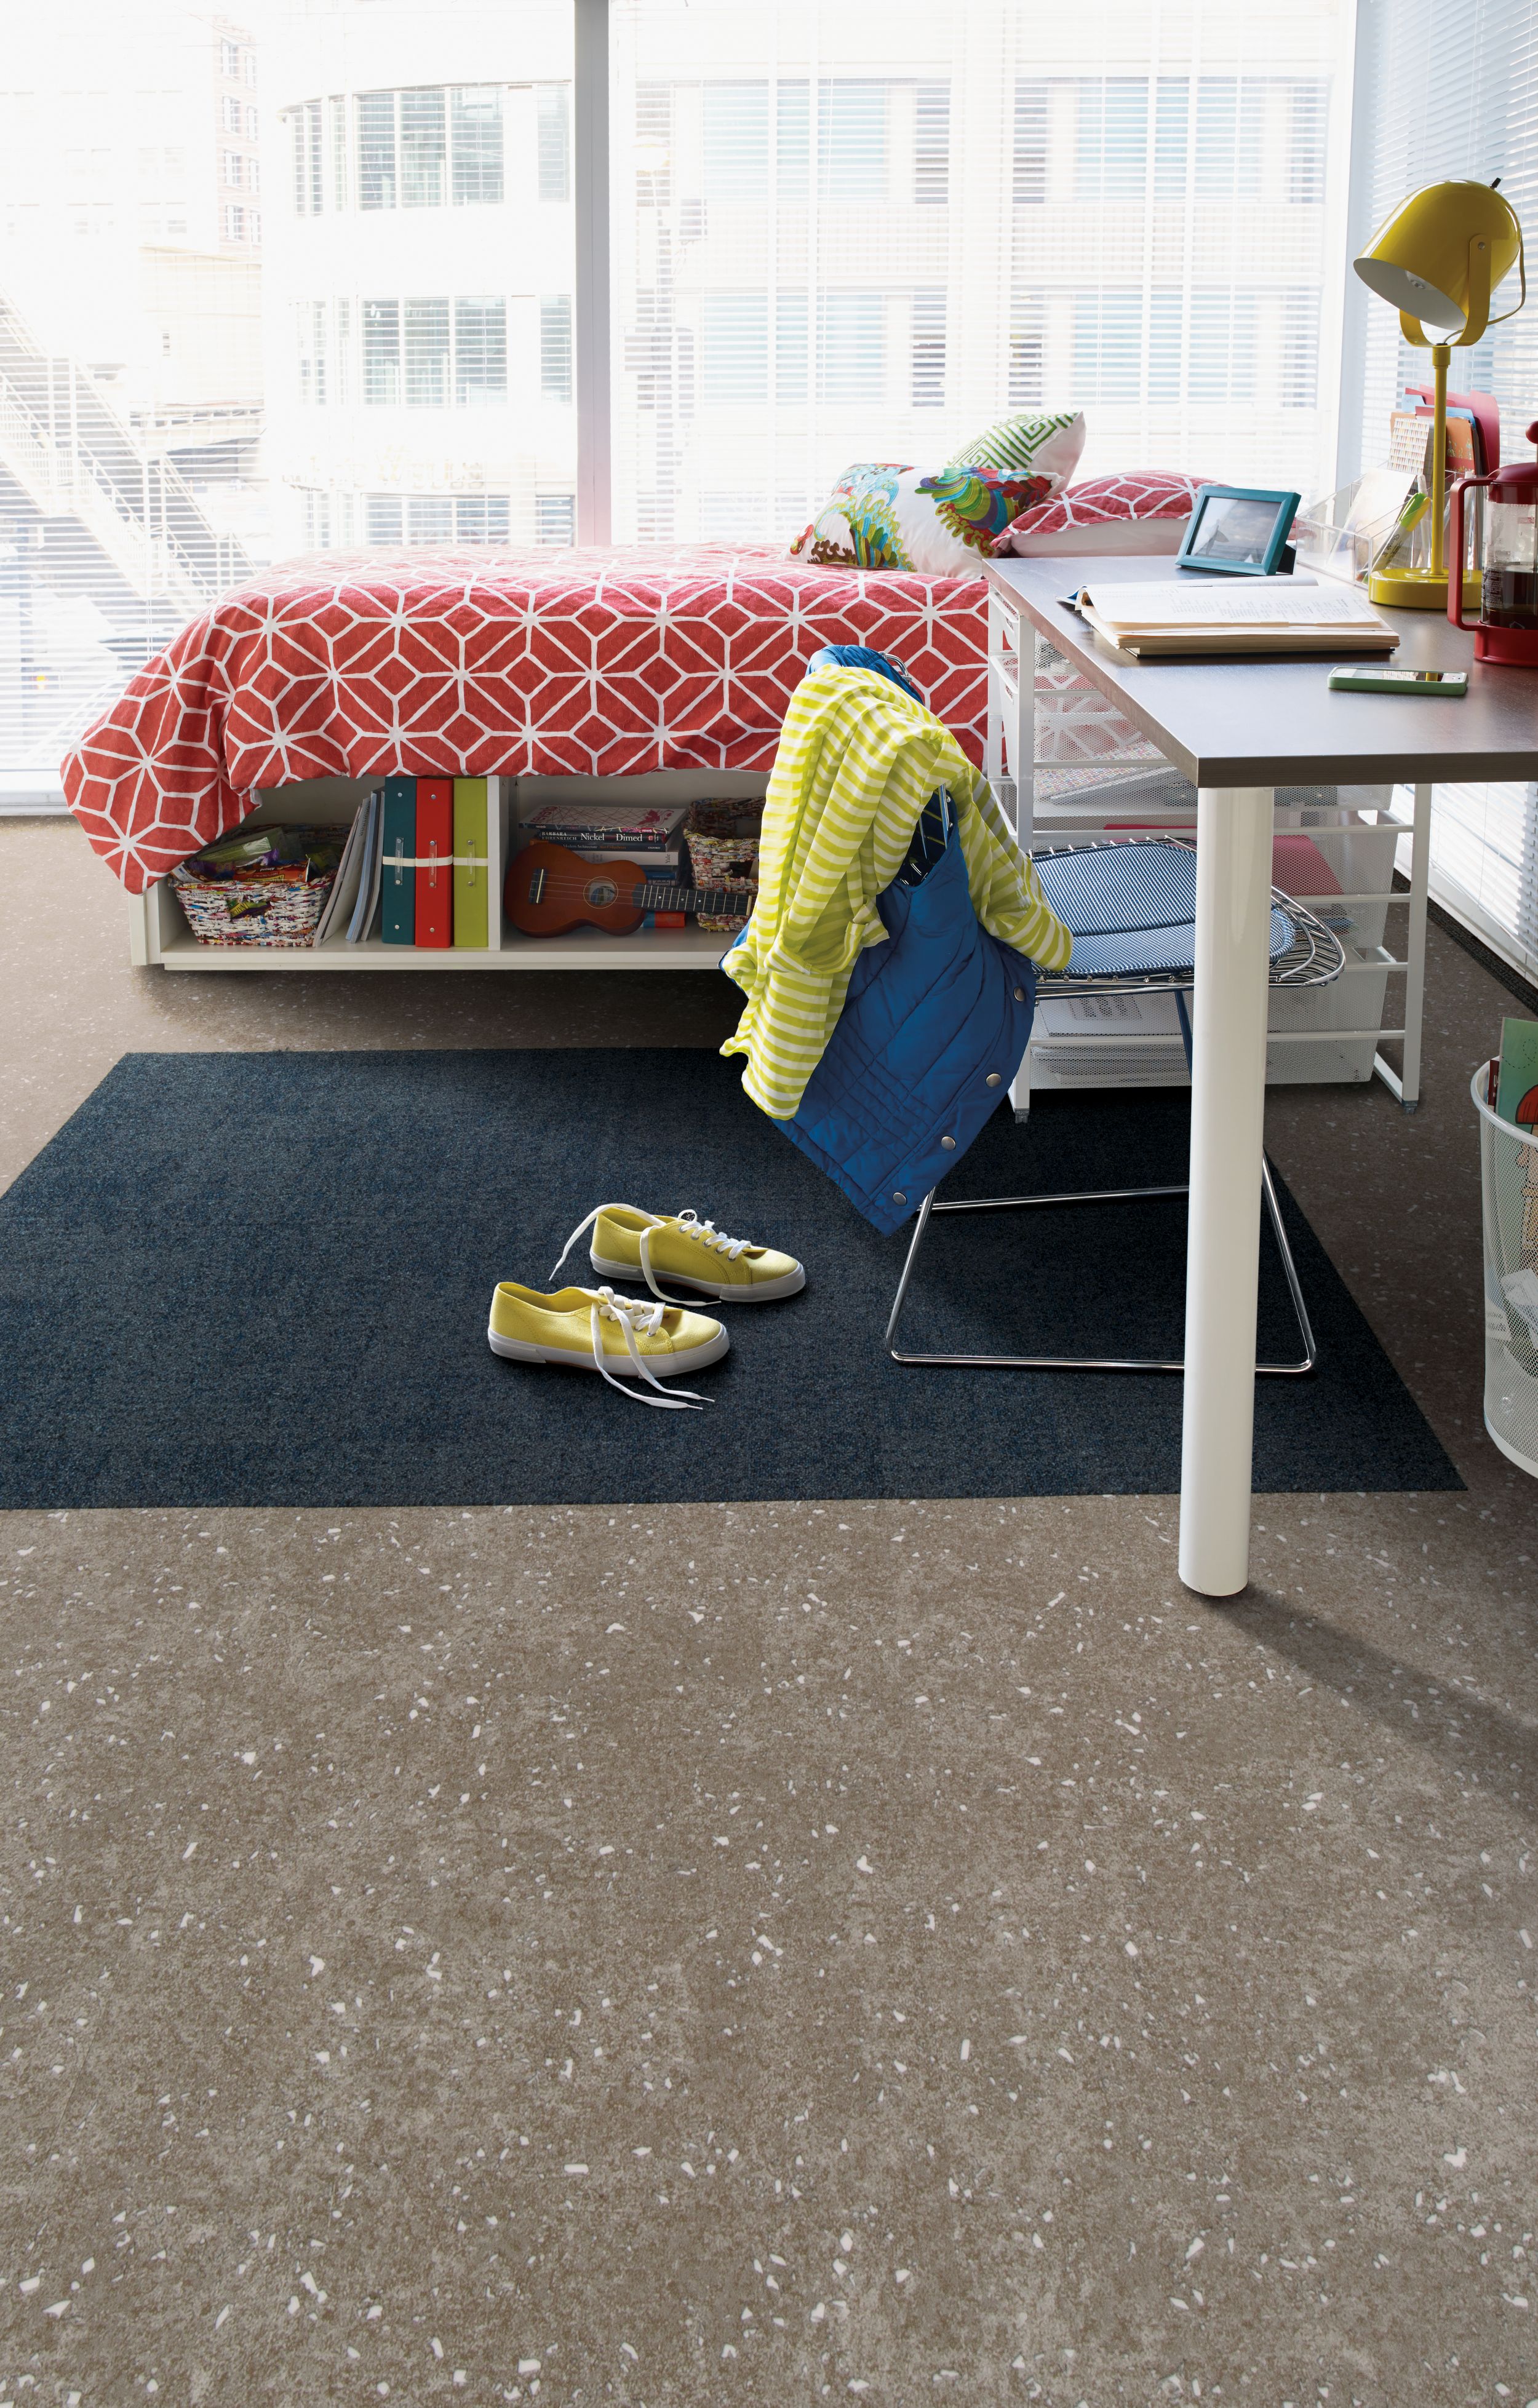 Interface Step in Time carpet tile and Walk the Aisle LVT in a dorm room imagen número 13